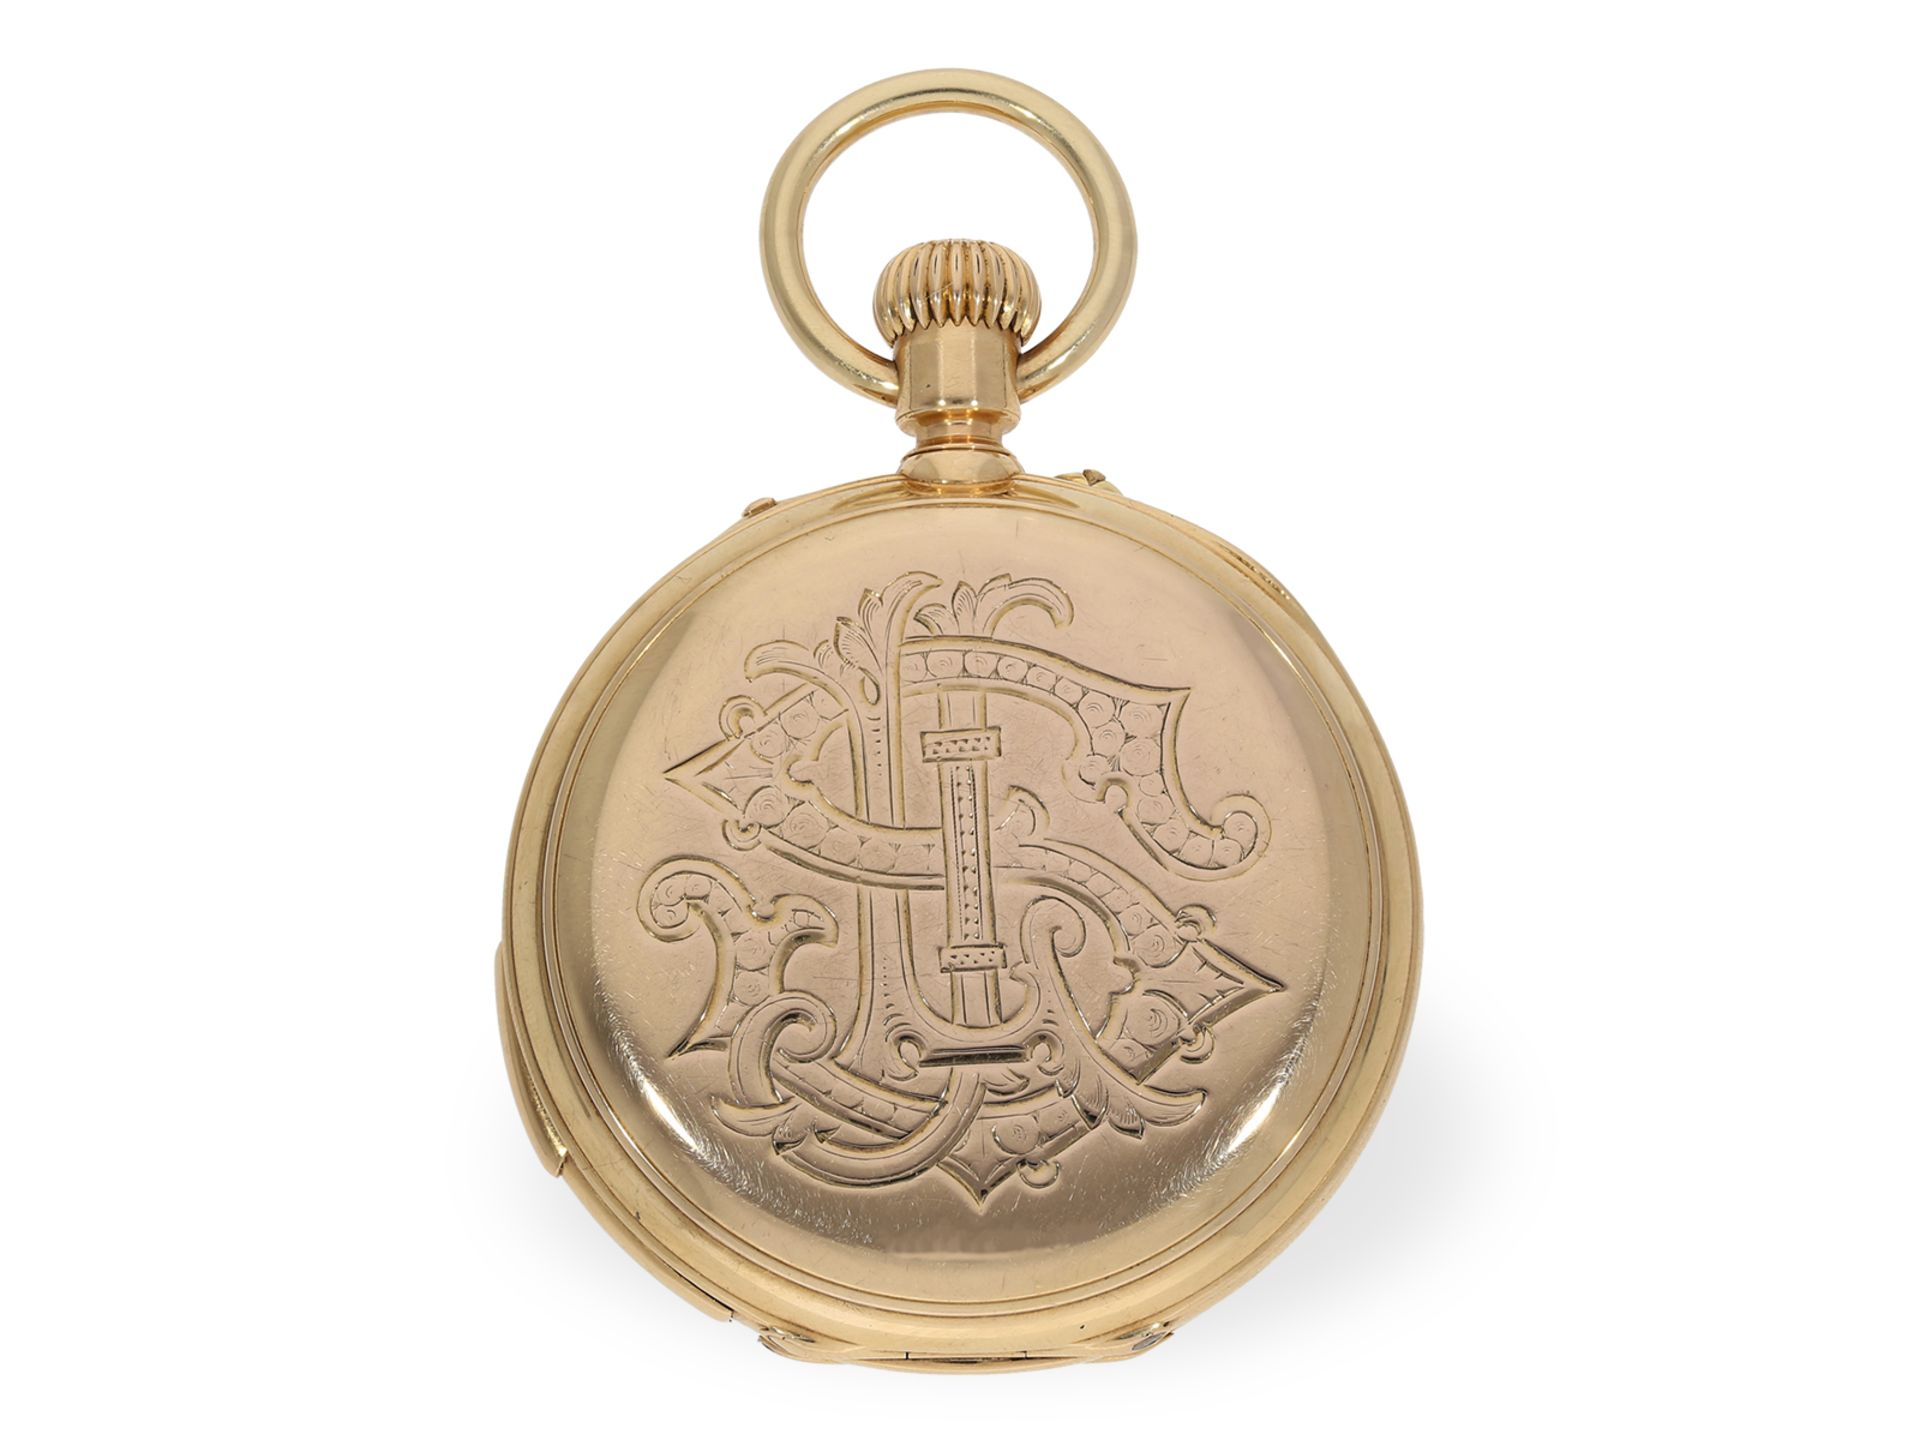 Pocket watch: Patek Philippe with double complication, chronograph and 5-minute repeater, Geneva 187 - Image 6 of 7